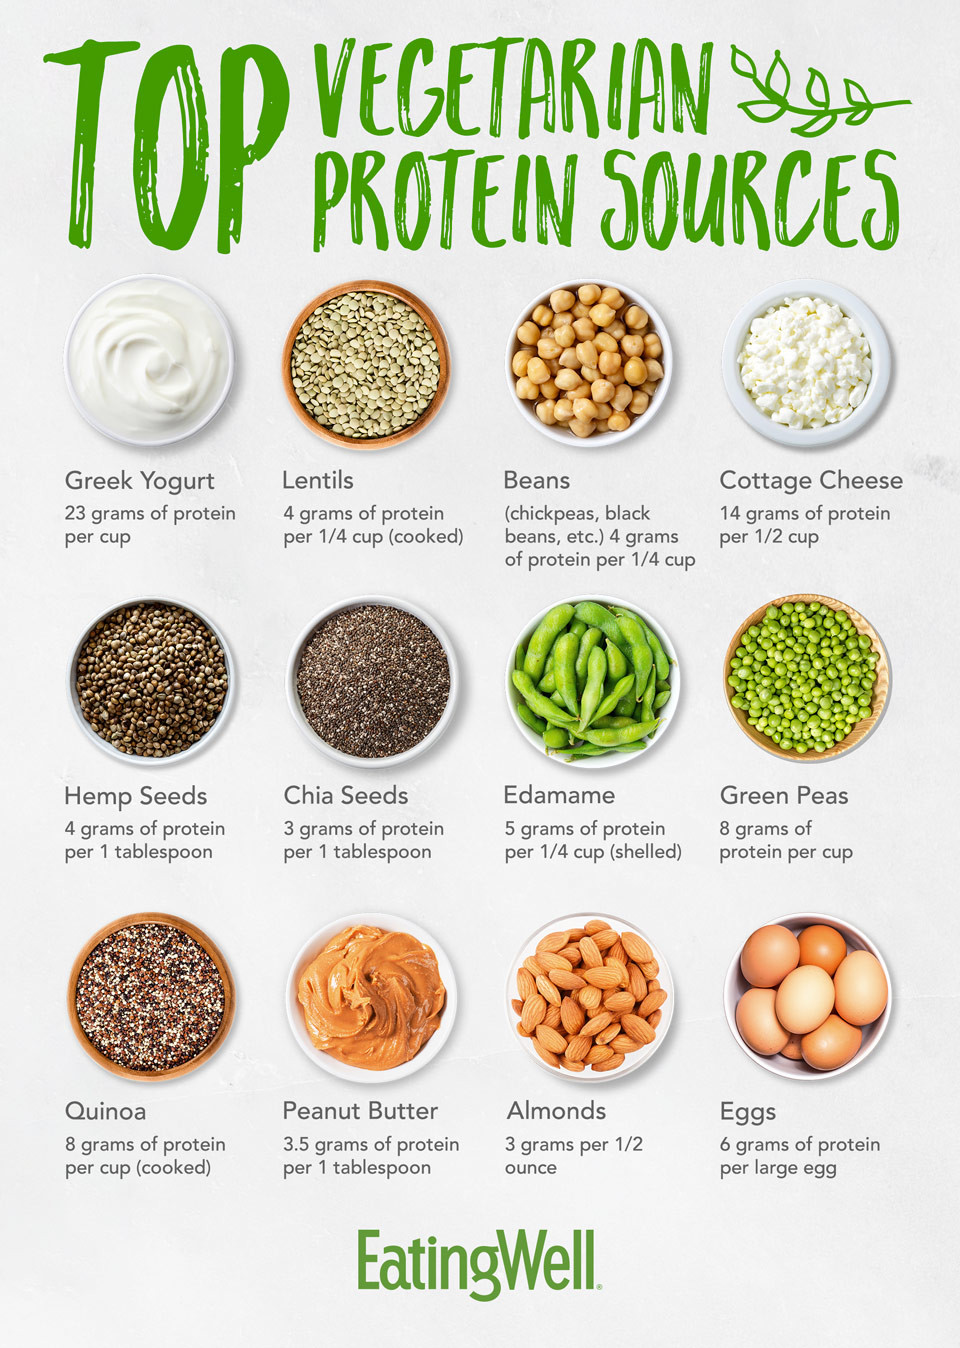 Protein Vegetarian Diets
 Top Ve arian Protein Sources EatingWell